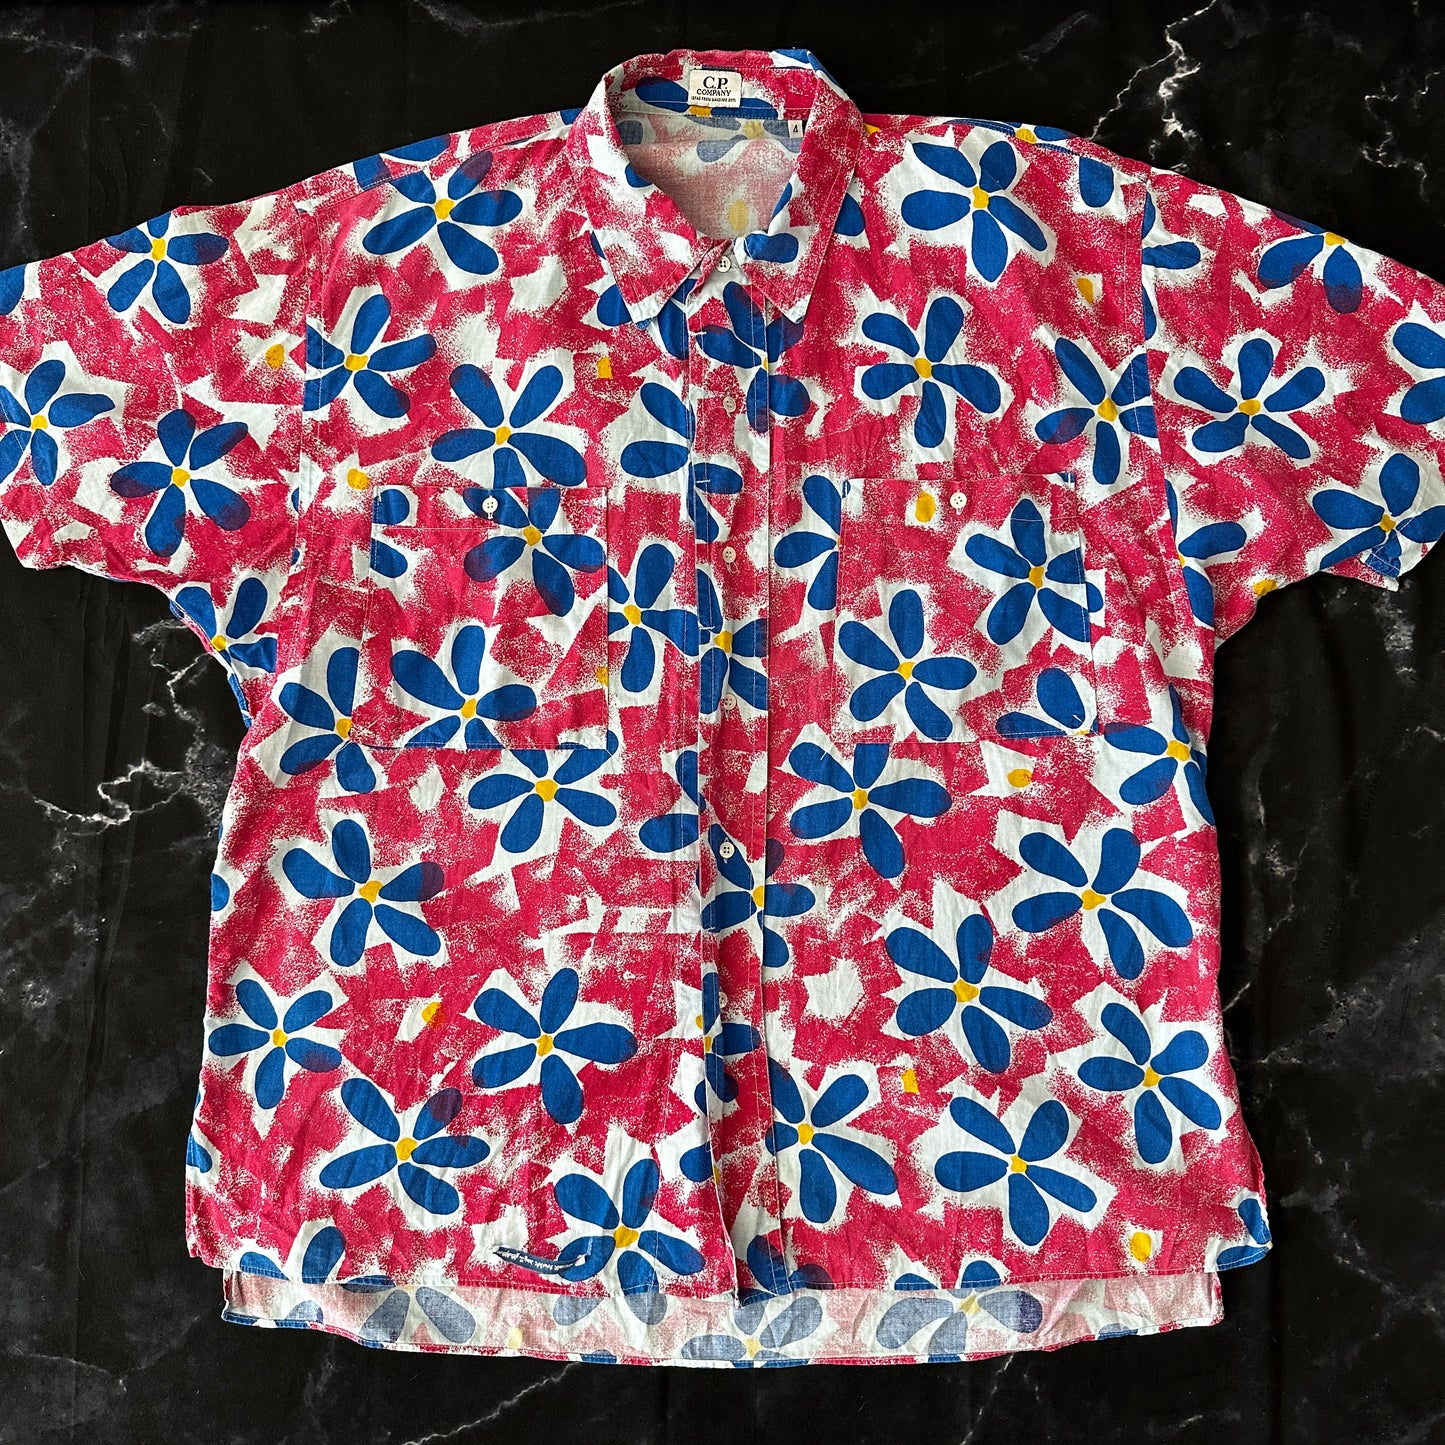 C.P. Company Vintage Floral Shirt - 4 / L - Made in Italy